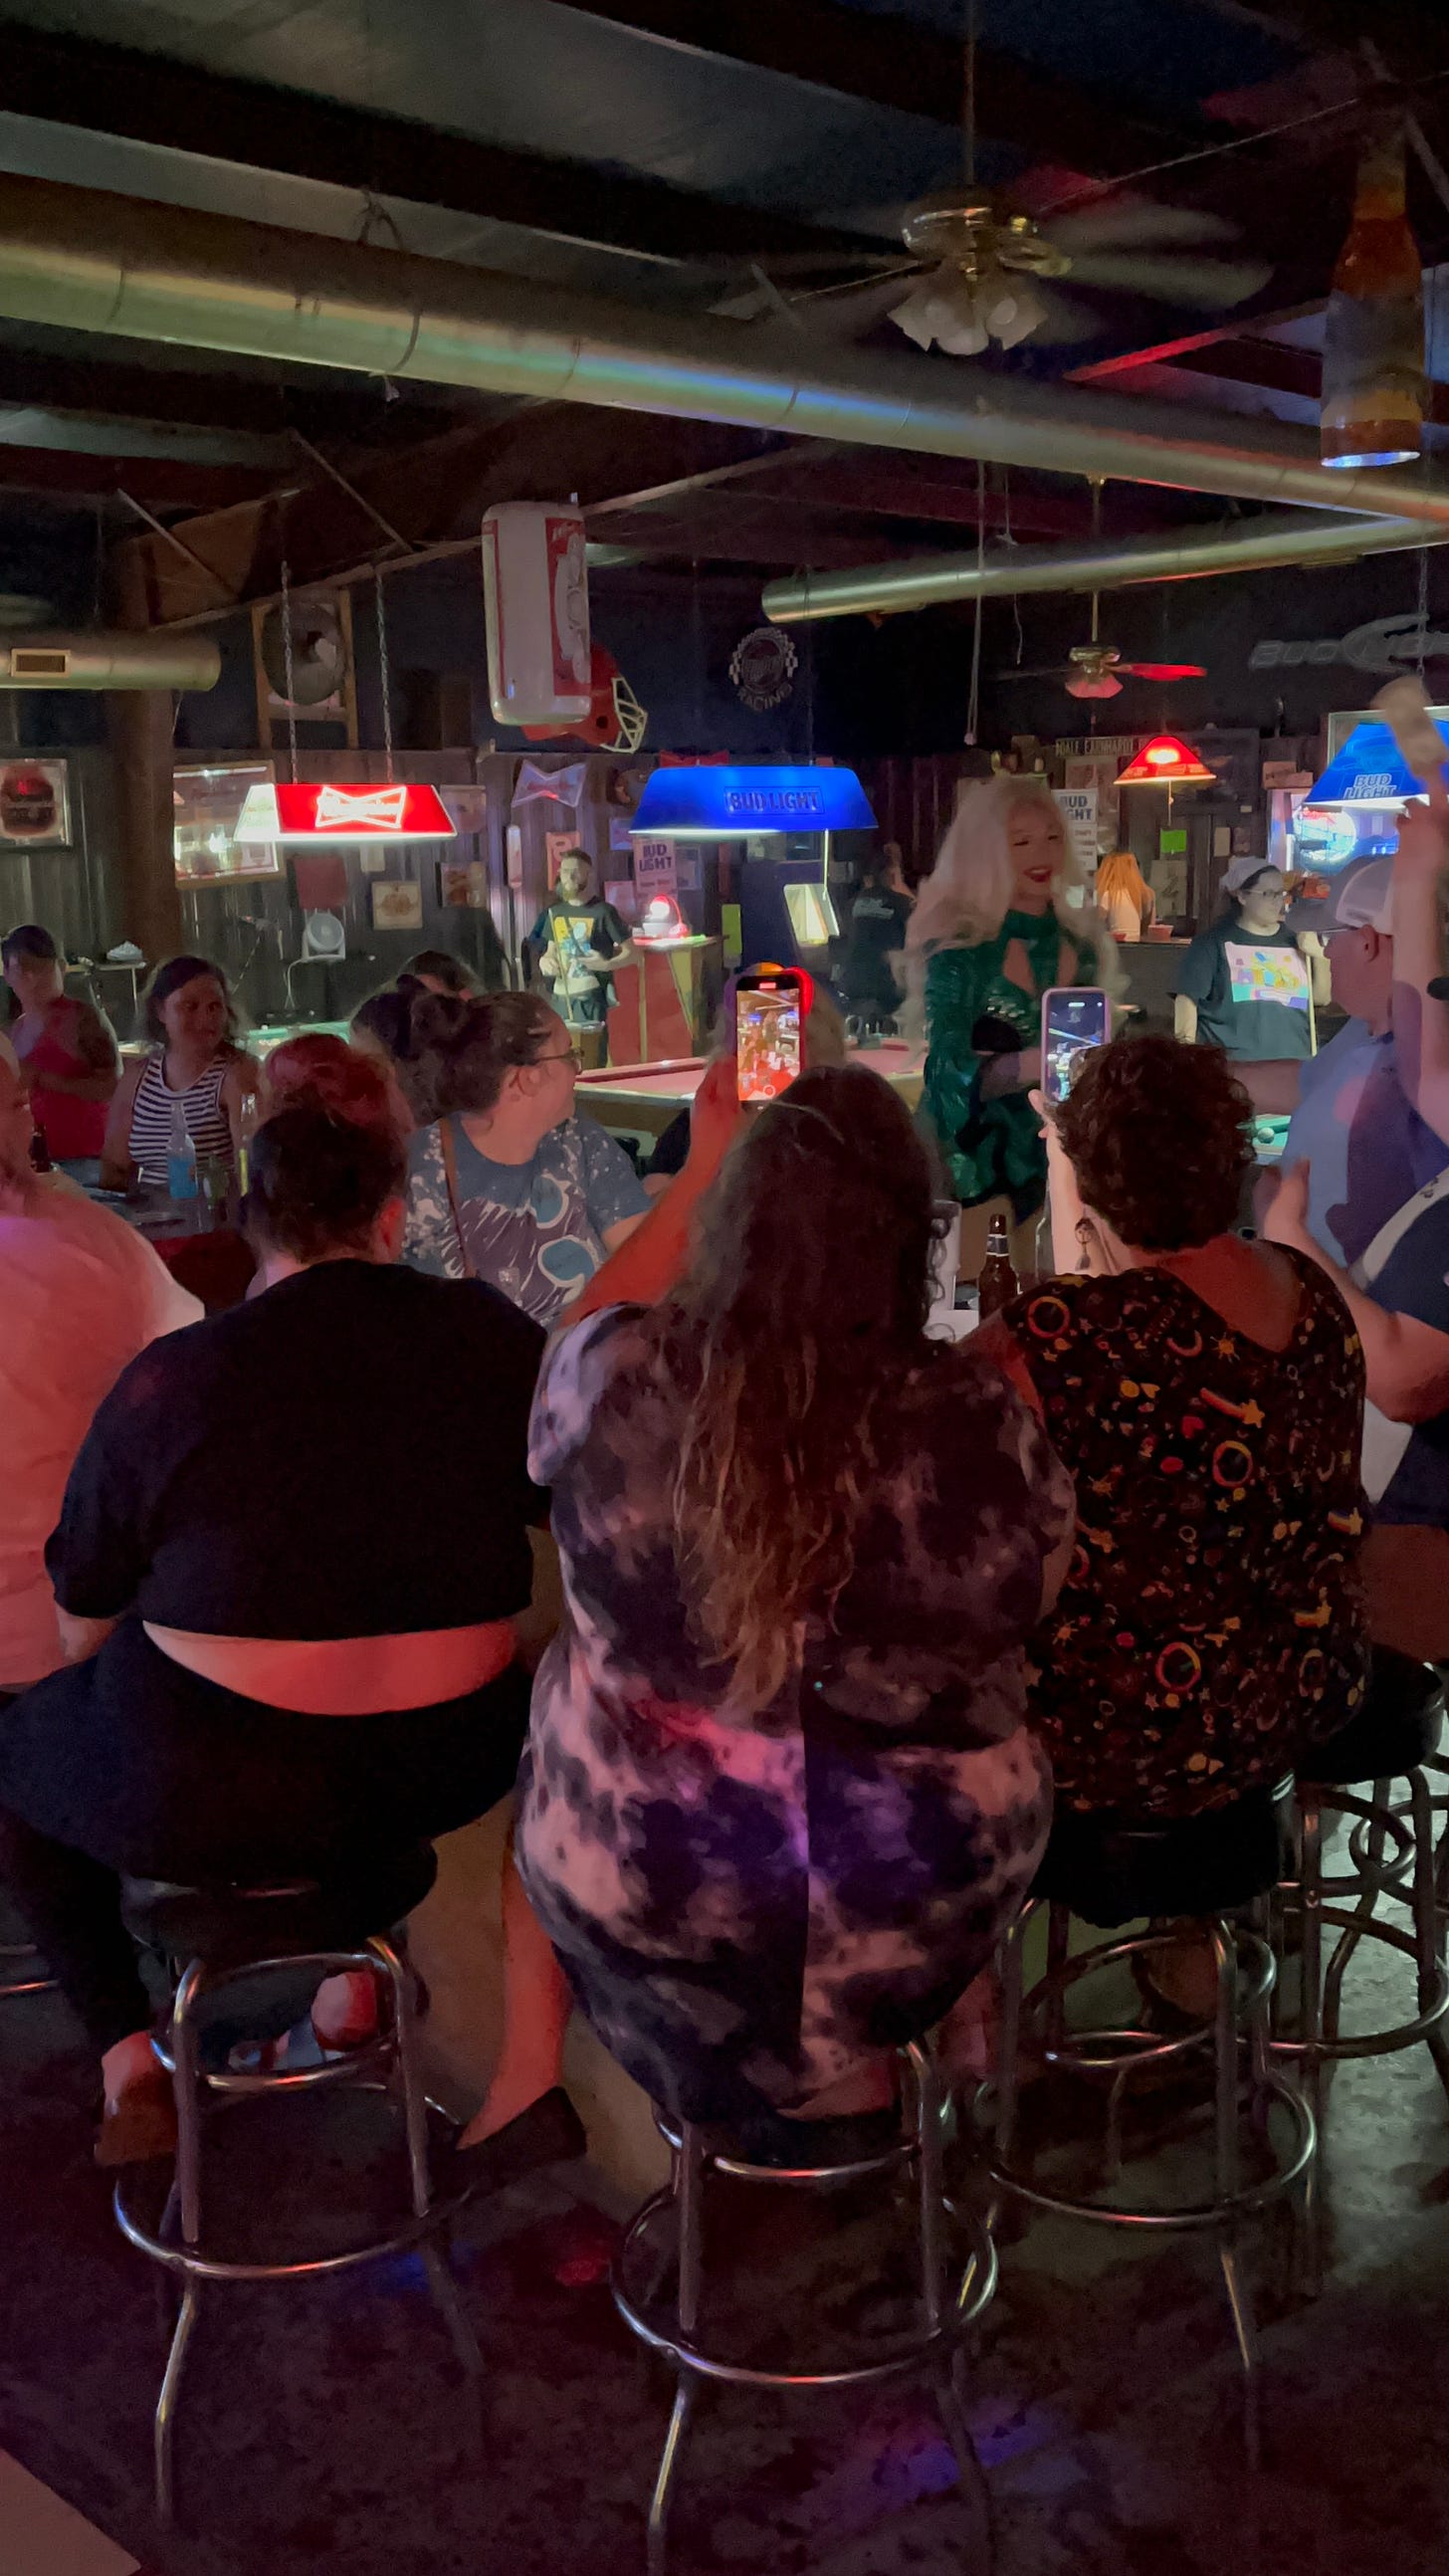 Multiple people sit on bar stools in a dark bar room filled with neon lights as a drag queen performs and is being photographed with smart phones.